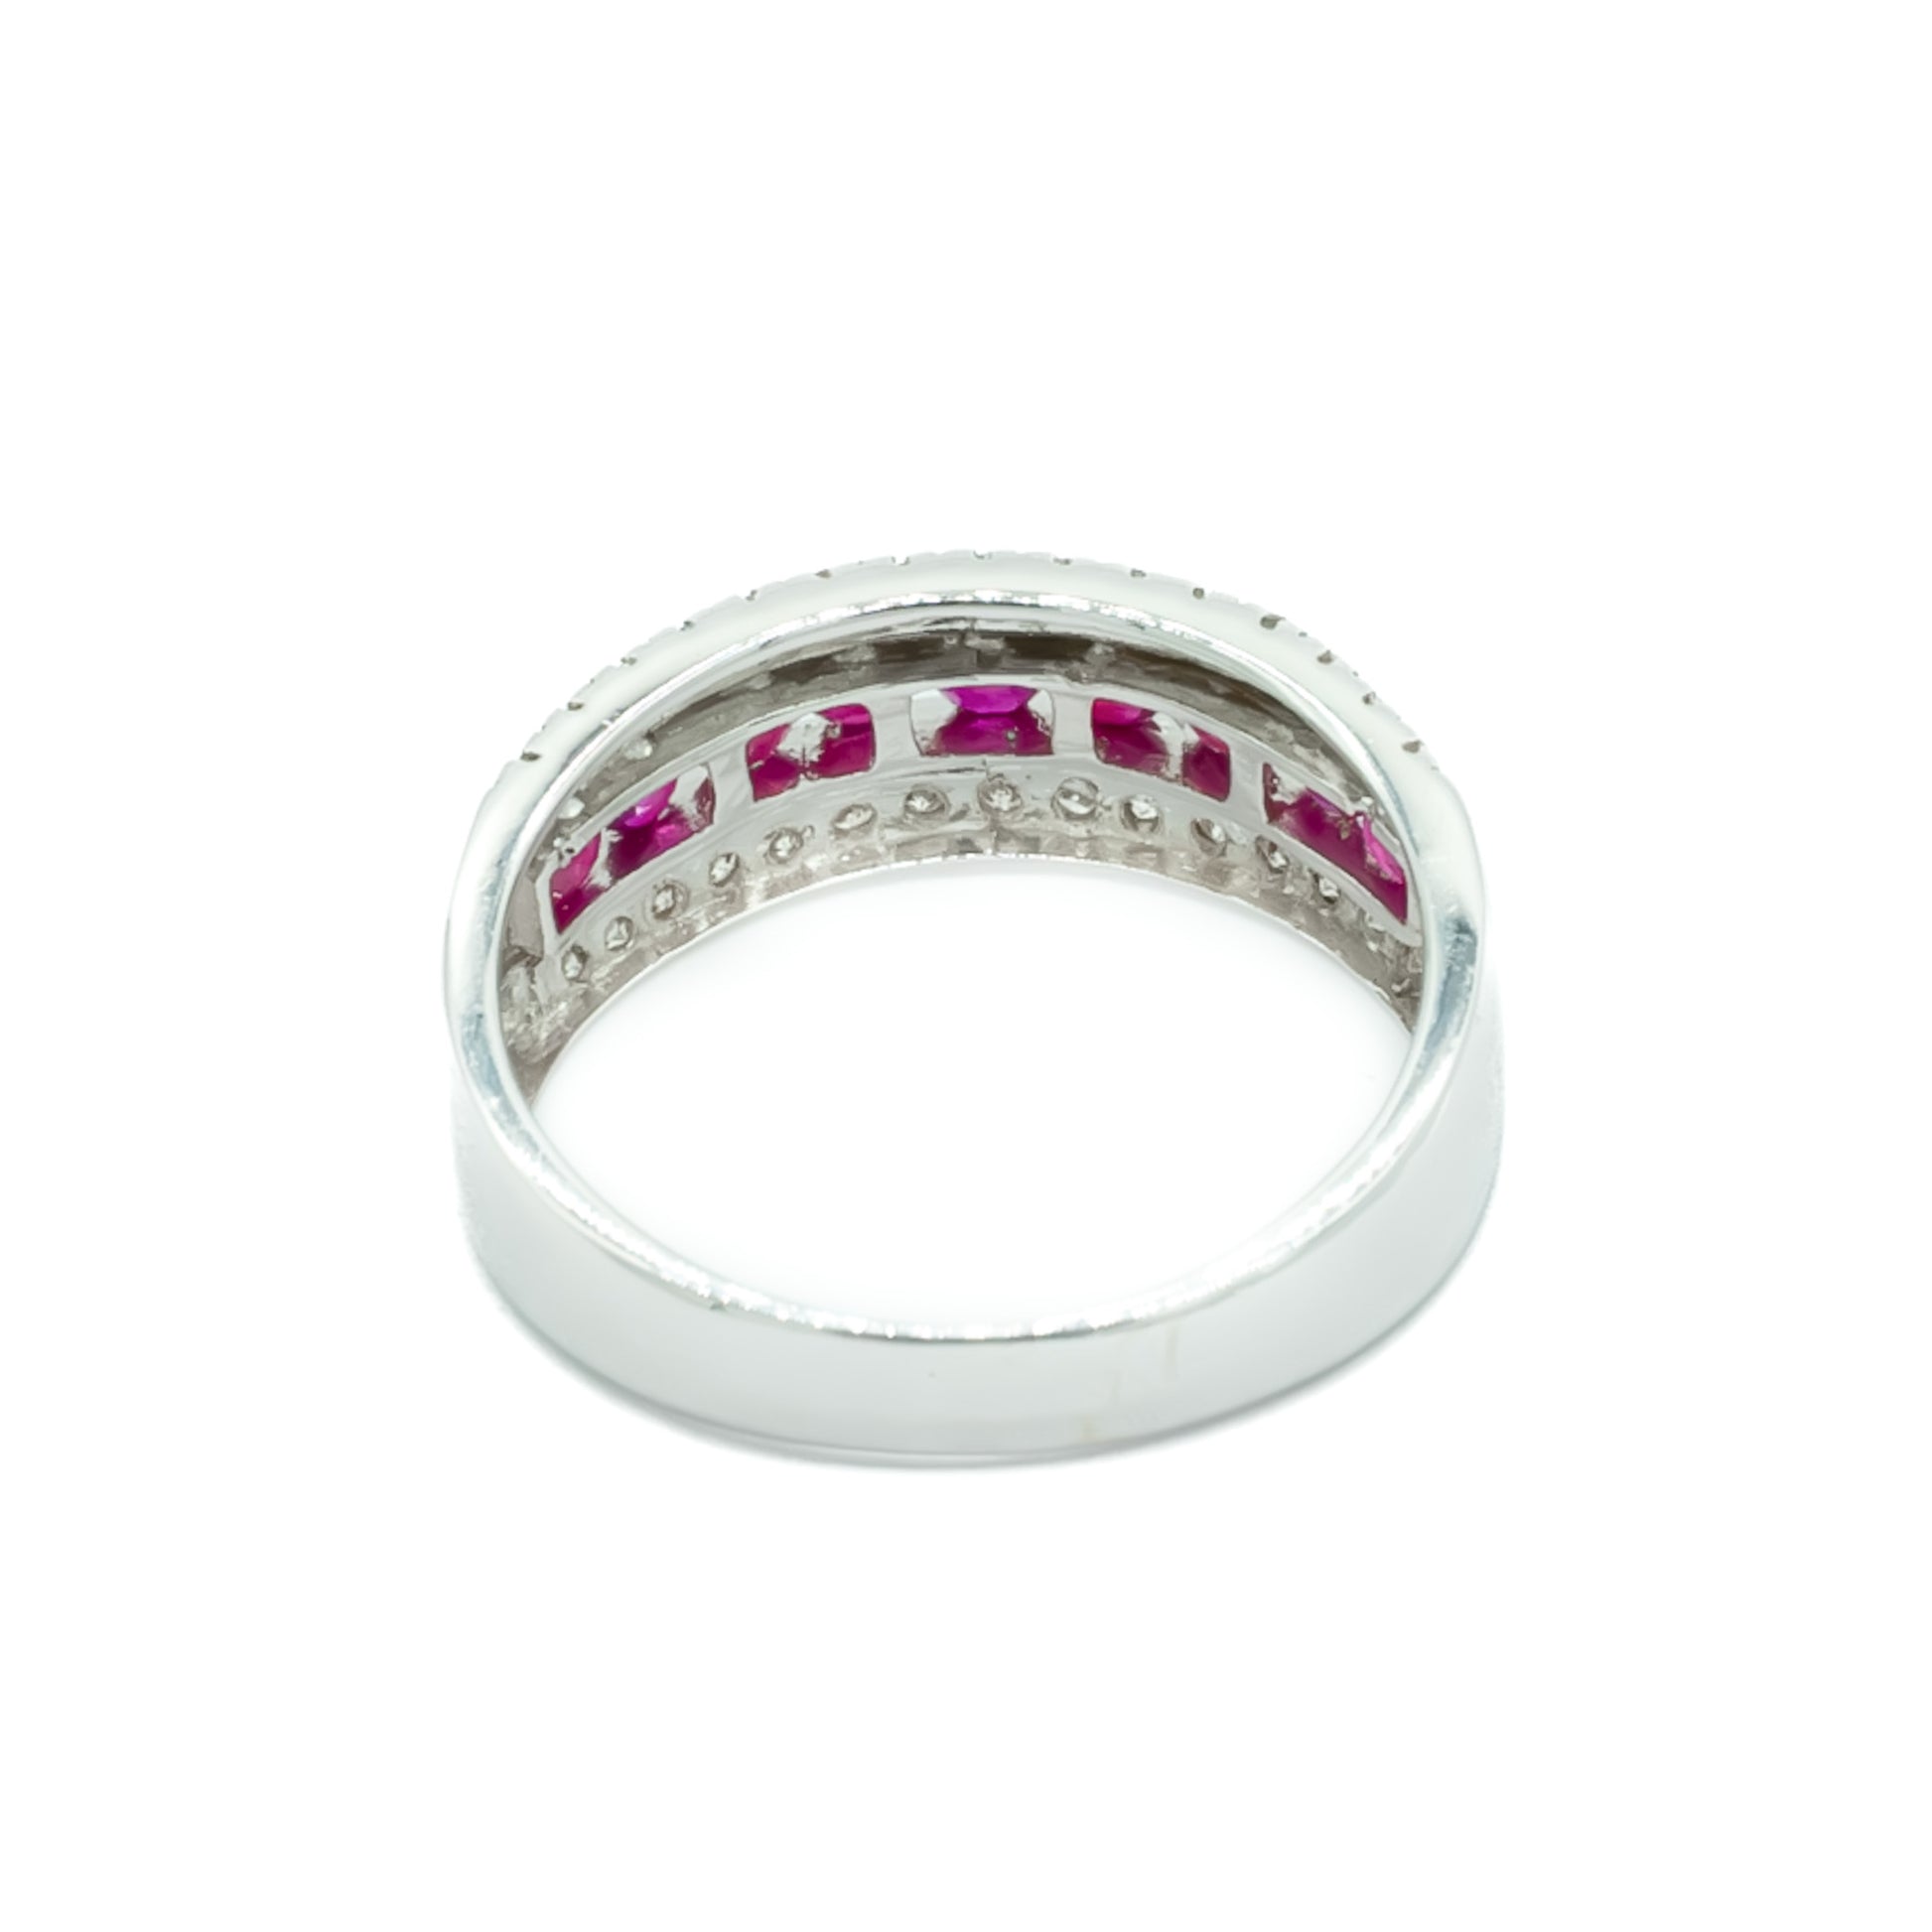 Classic vintage 14ct white gold ring set with nine faceted rubies and two rows of small diamonds. London